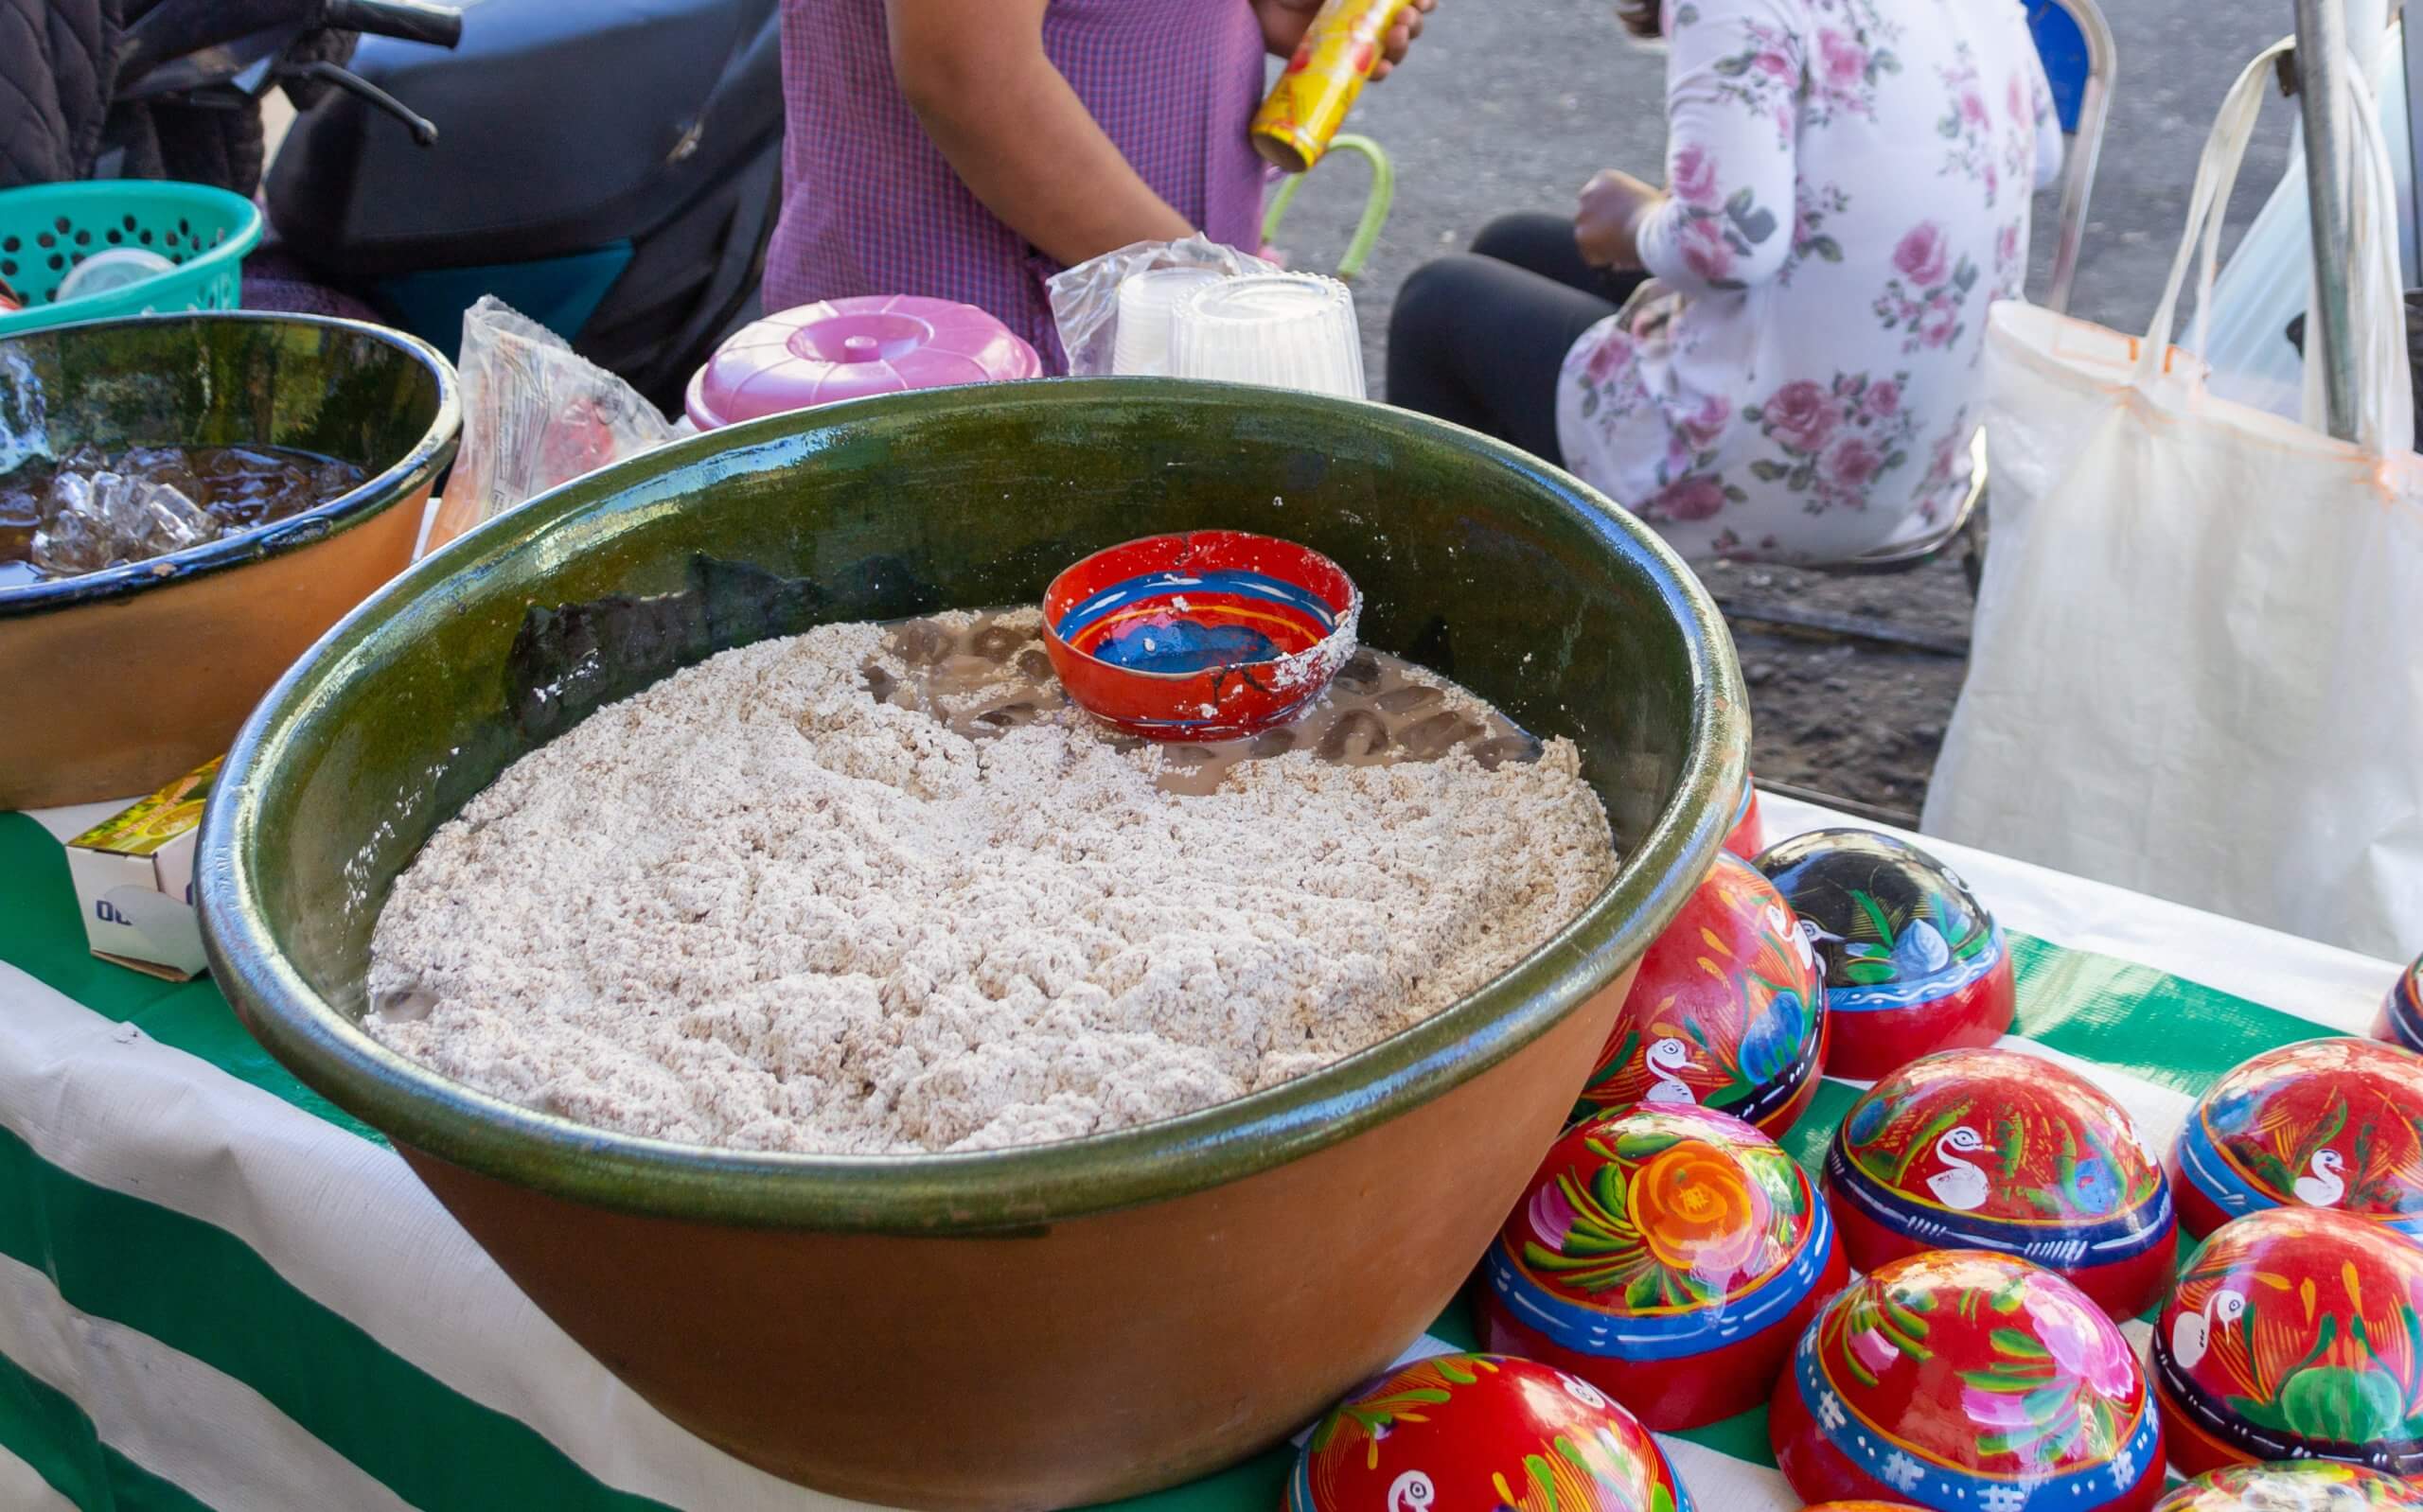 Large bowl of tejate in a market setting